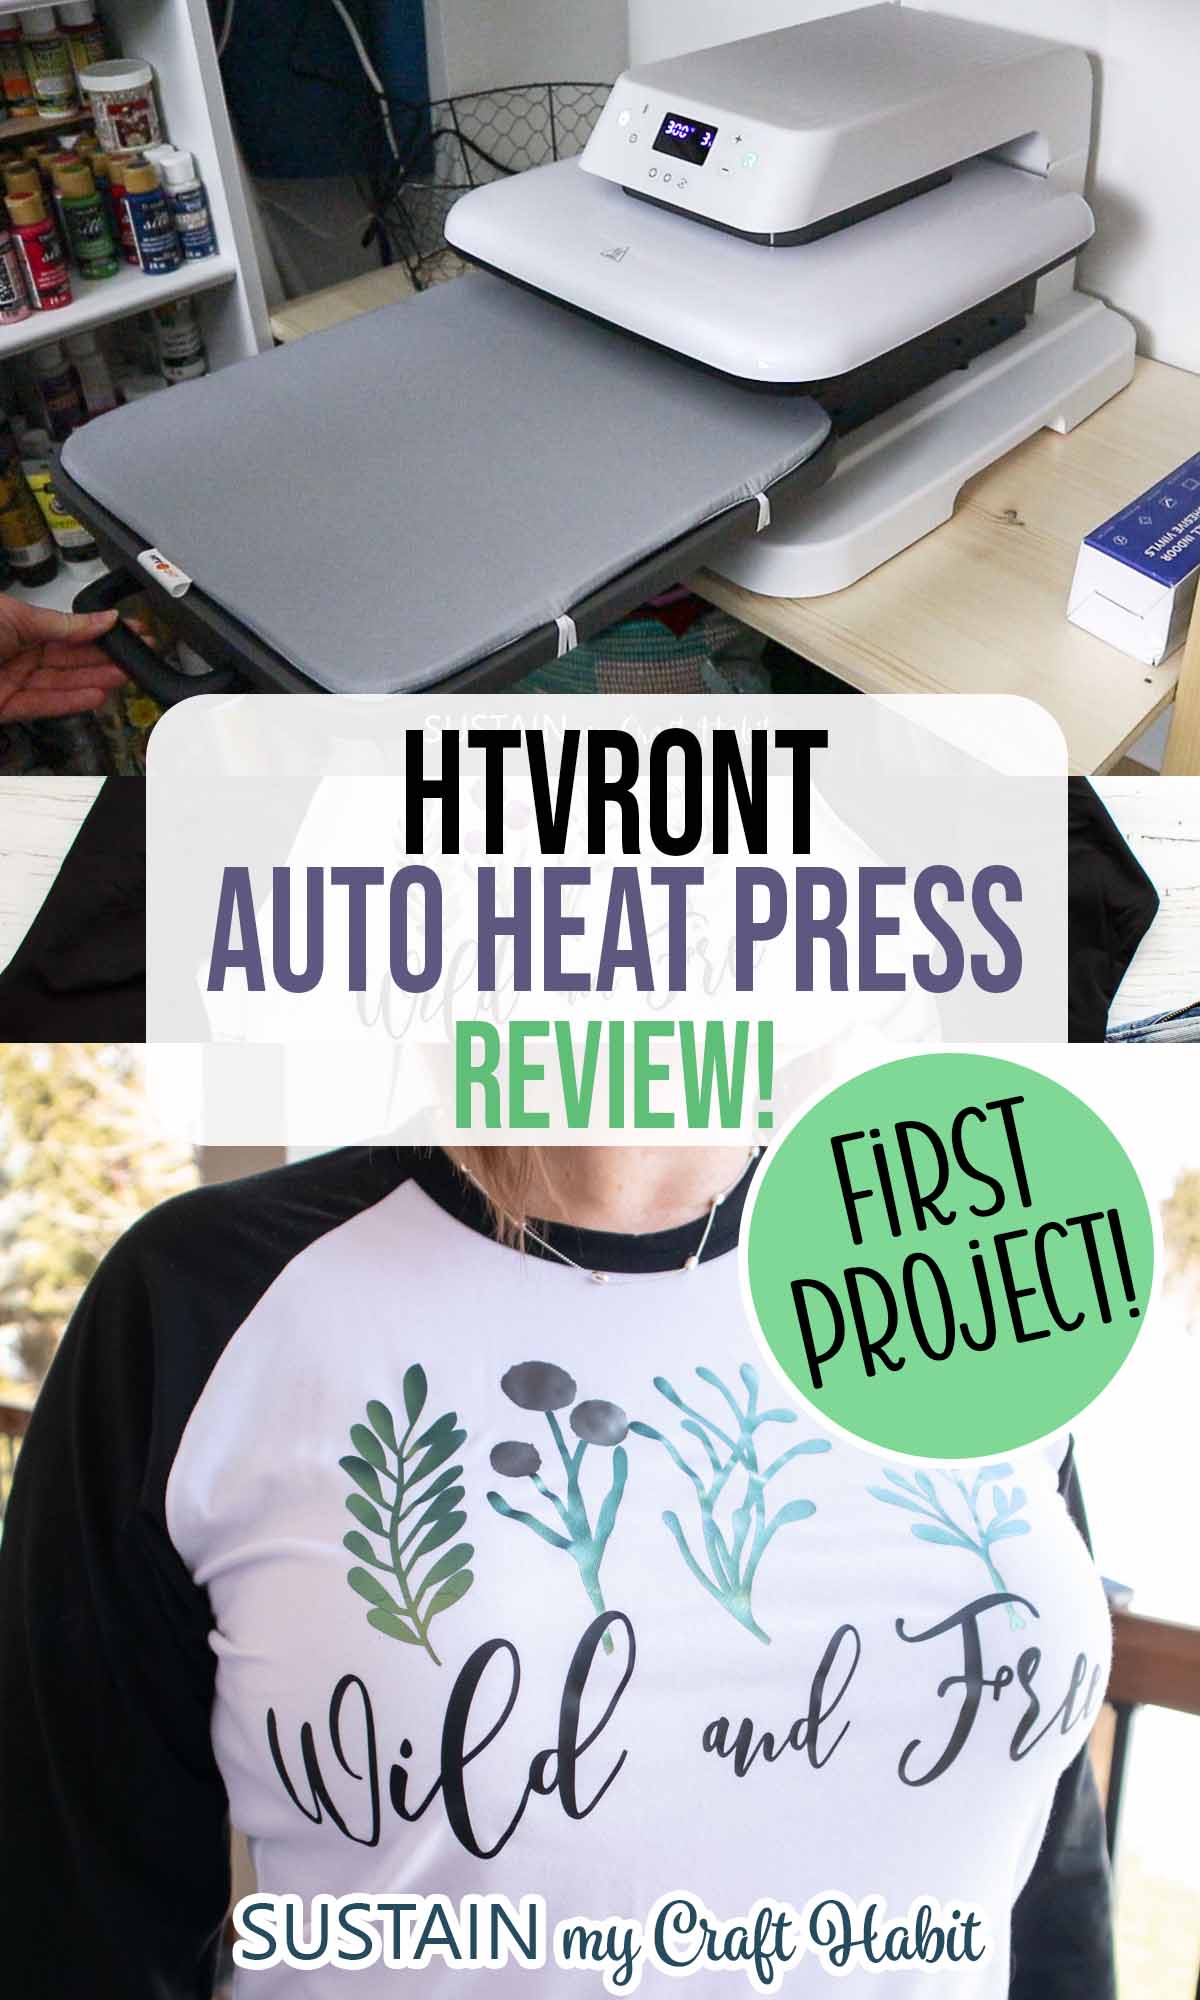 Collage of images showing the HTVRONT Auto Heat Press and woman wearing tshirt embellished with heat transfer vinyl.